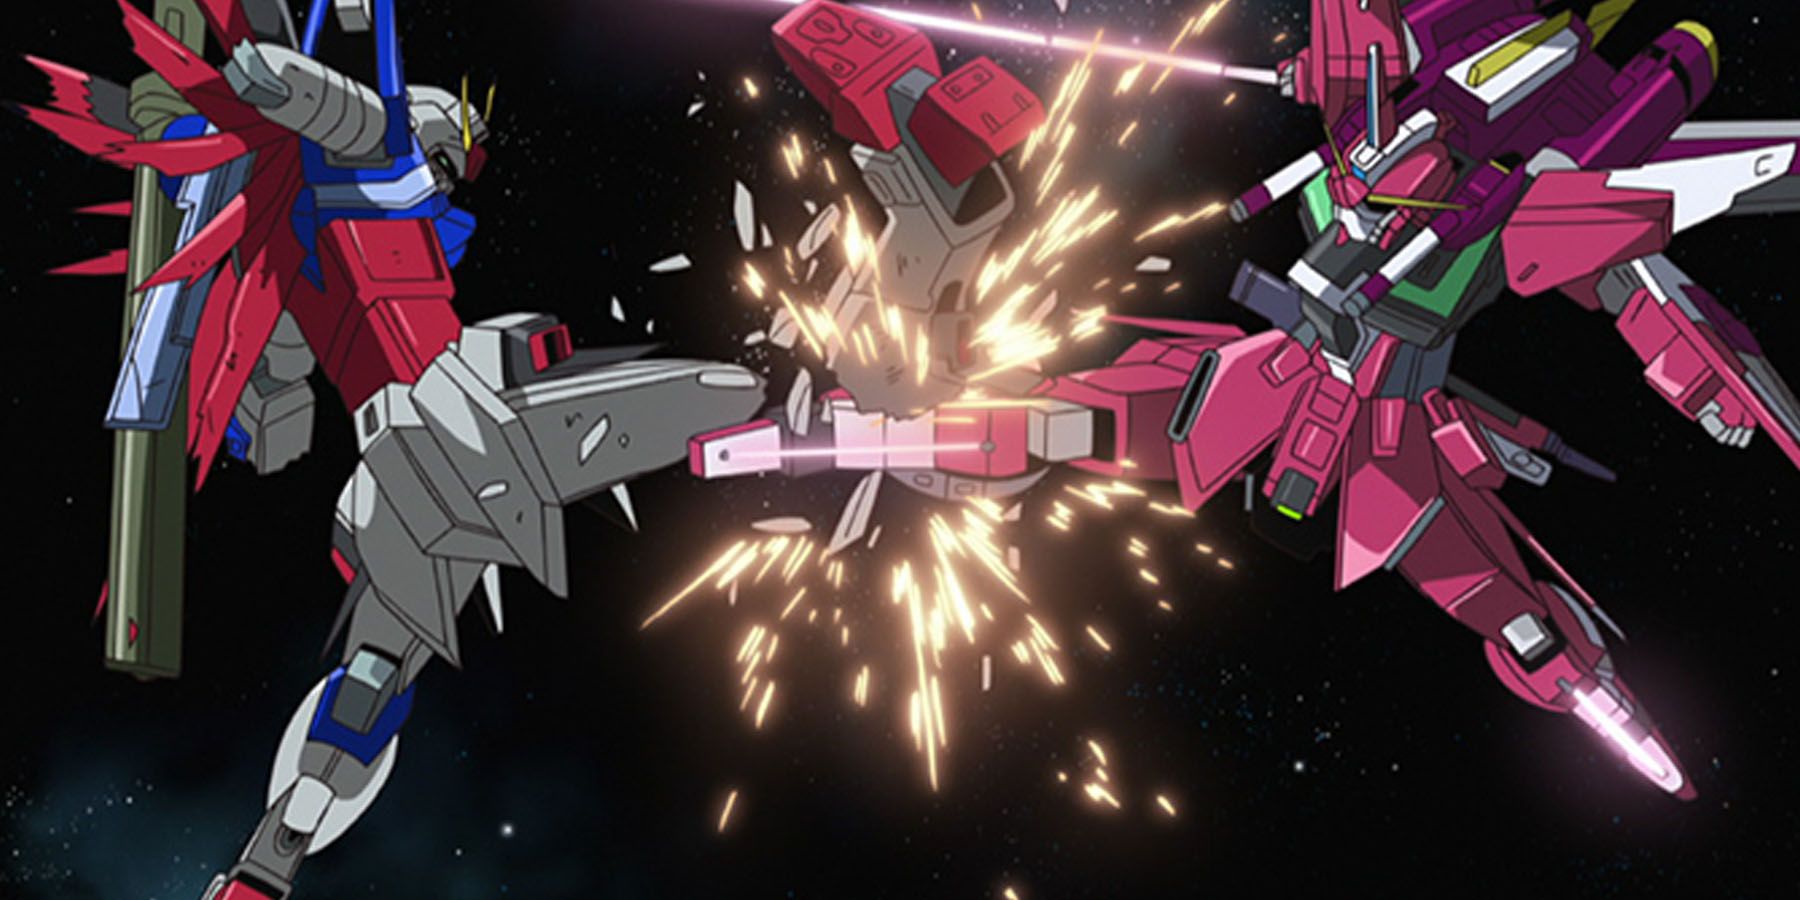 Freedom Gundam of the Earth Alliance and Justice of the ZAFT in combat